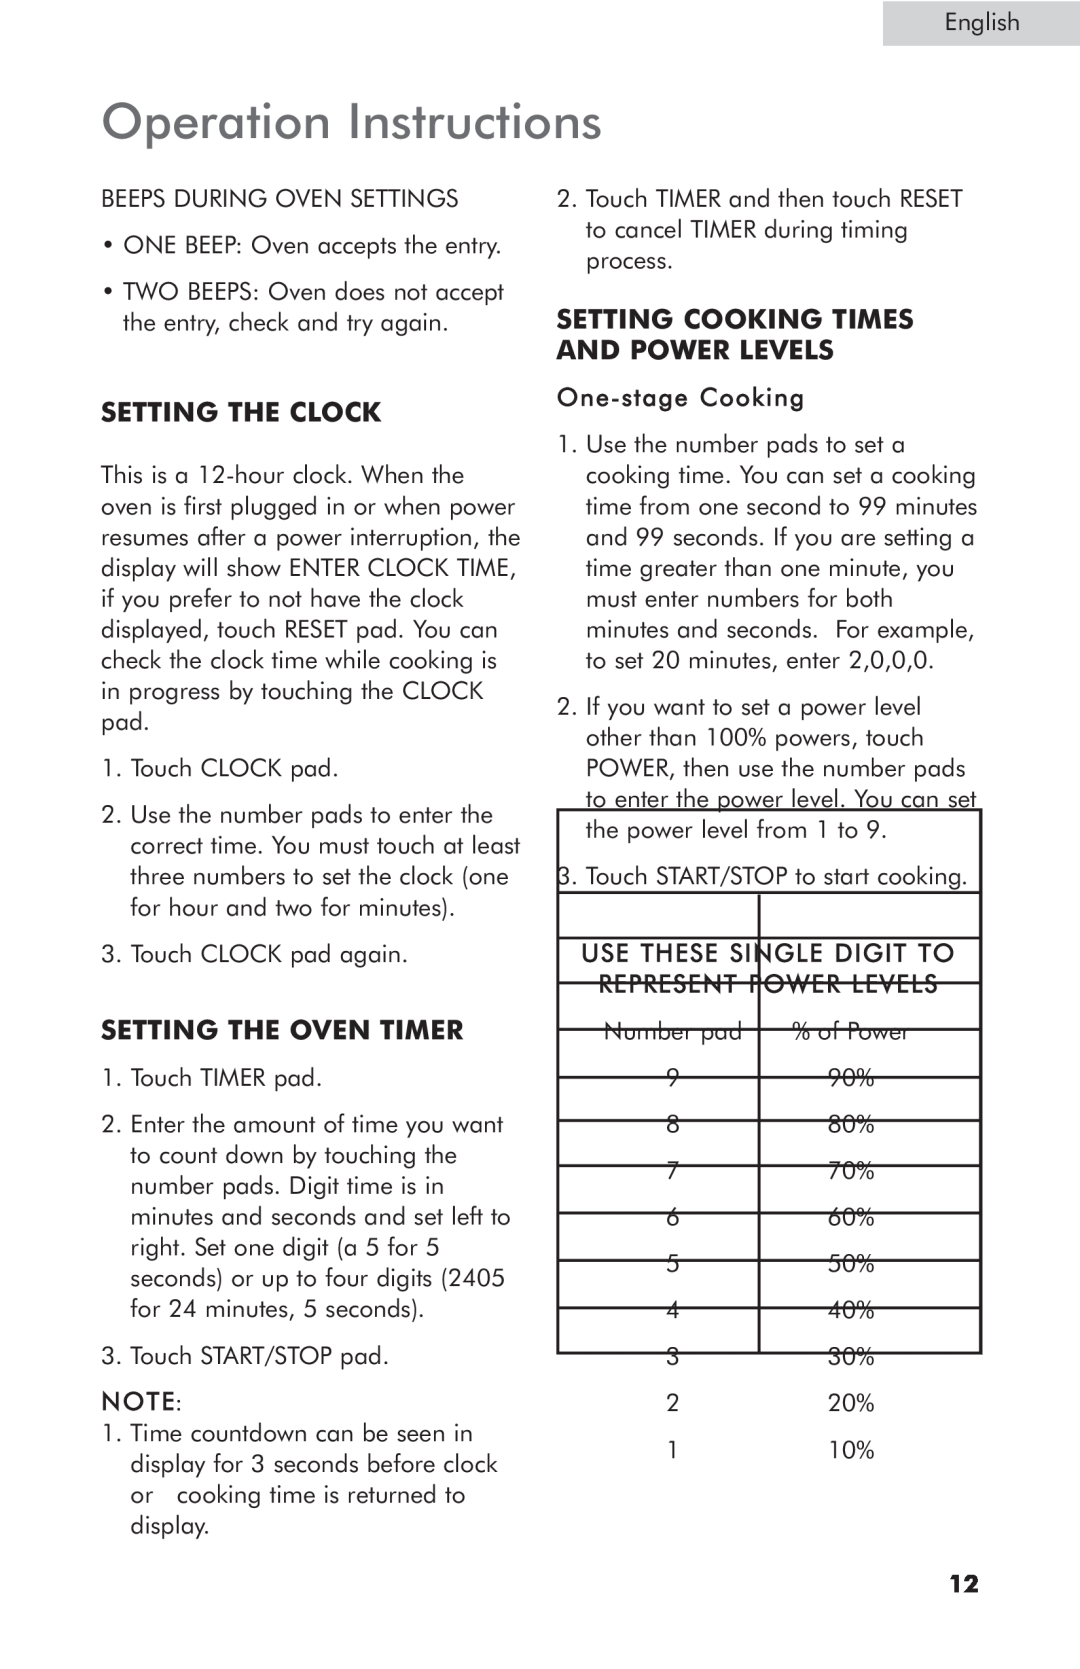 Haier MWG7047TW / B user manual Operation Instructions, Setting The Clock, Setting The Oven Timer 